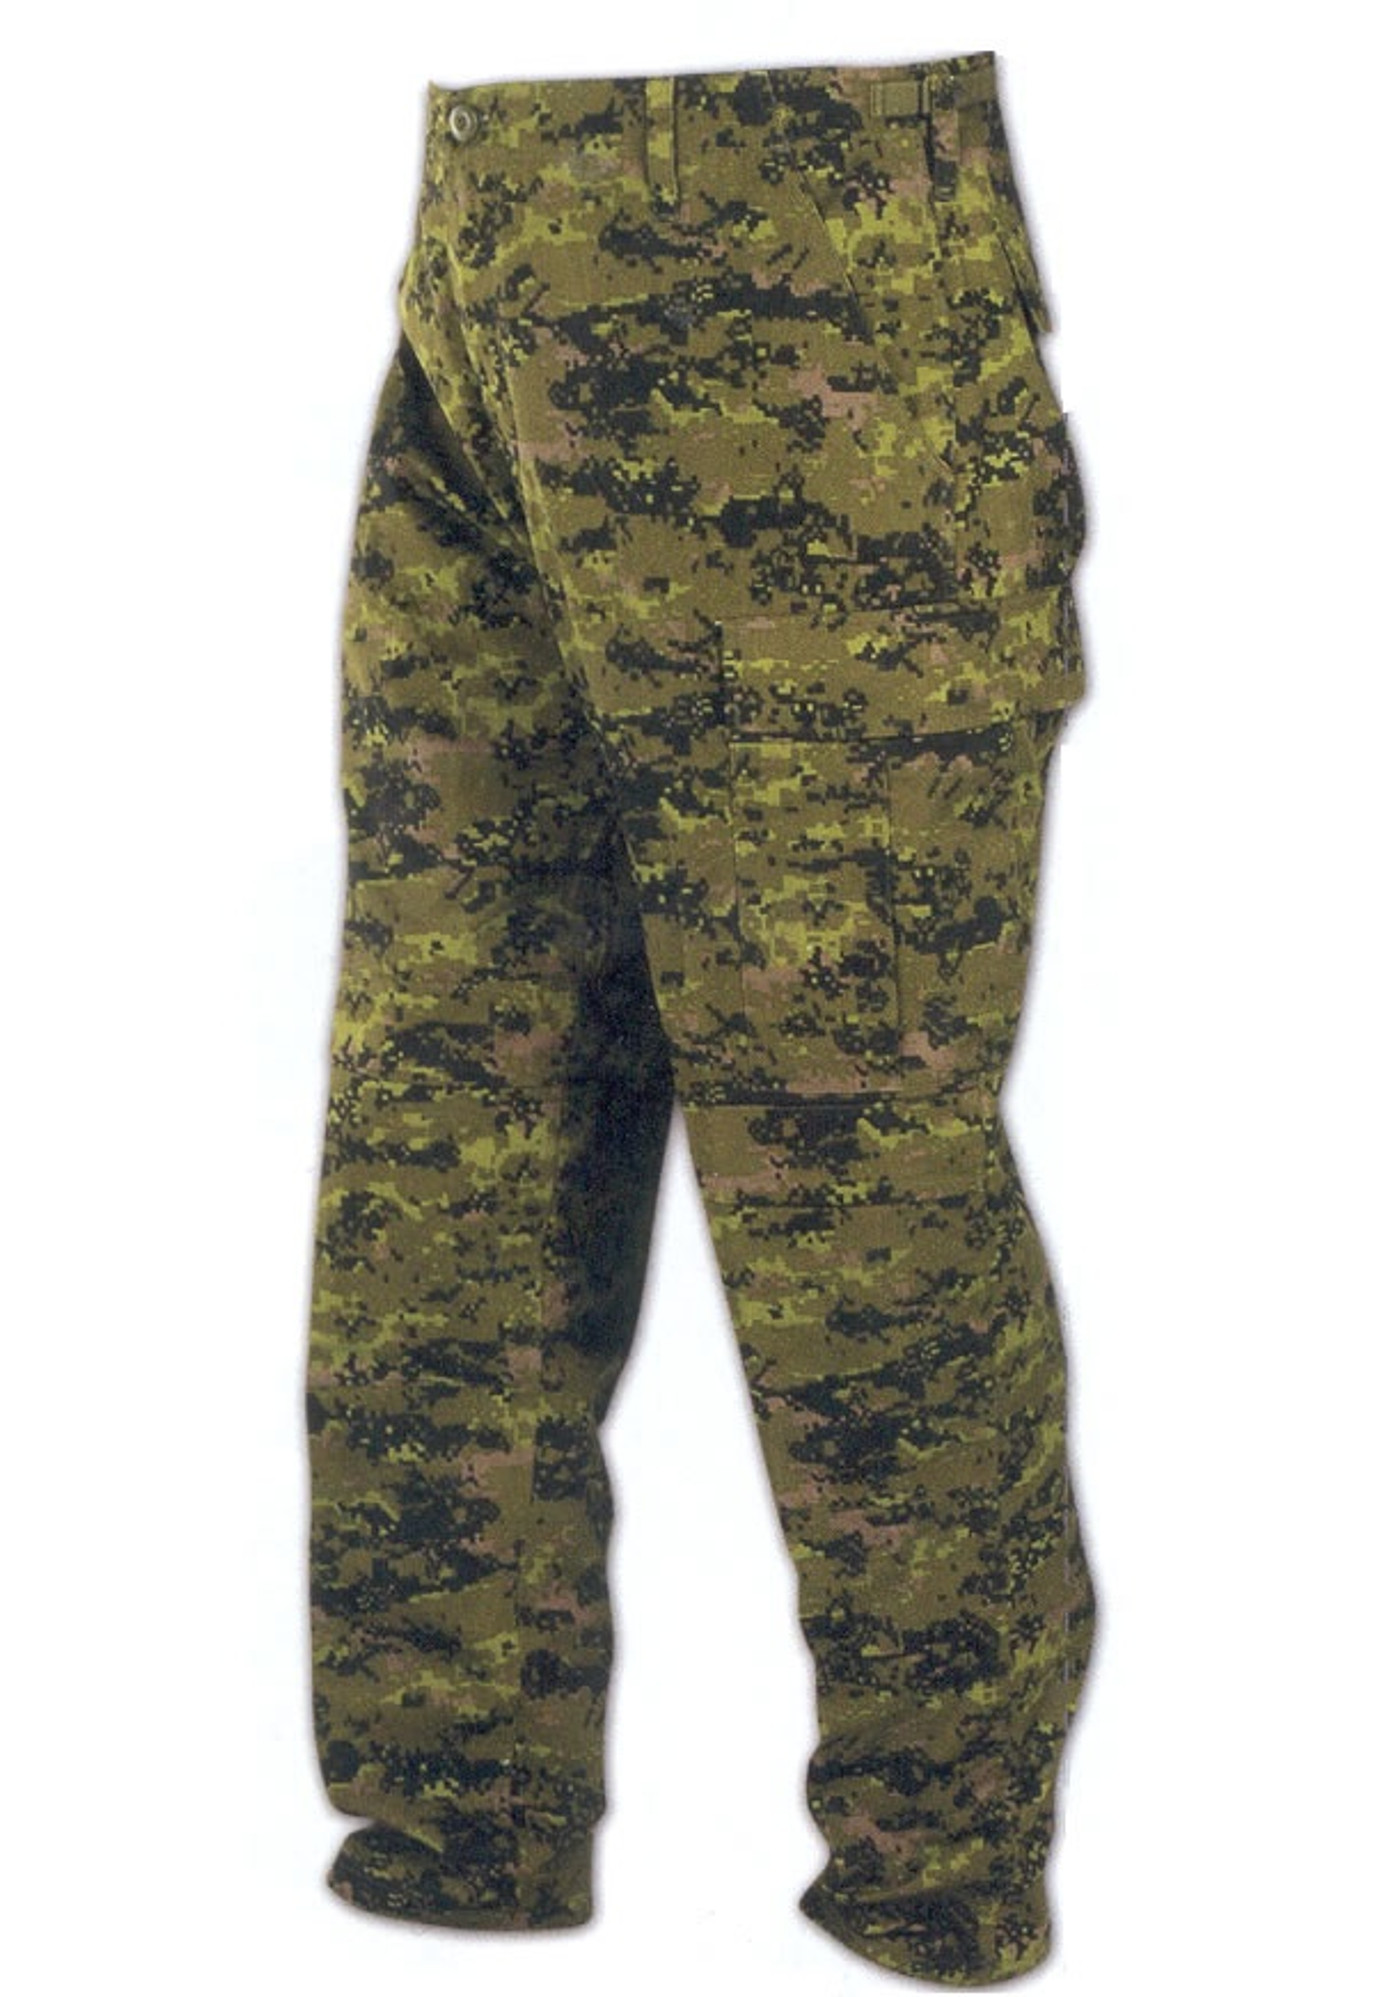 Canadian Military Style Pants - Canadian Digital